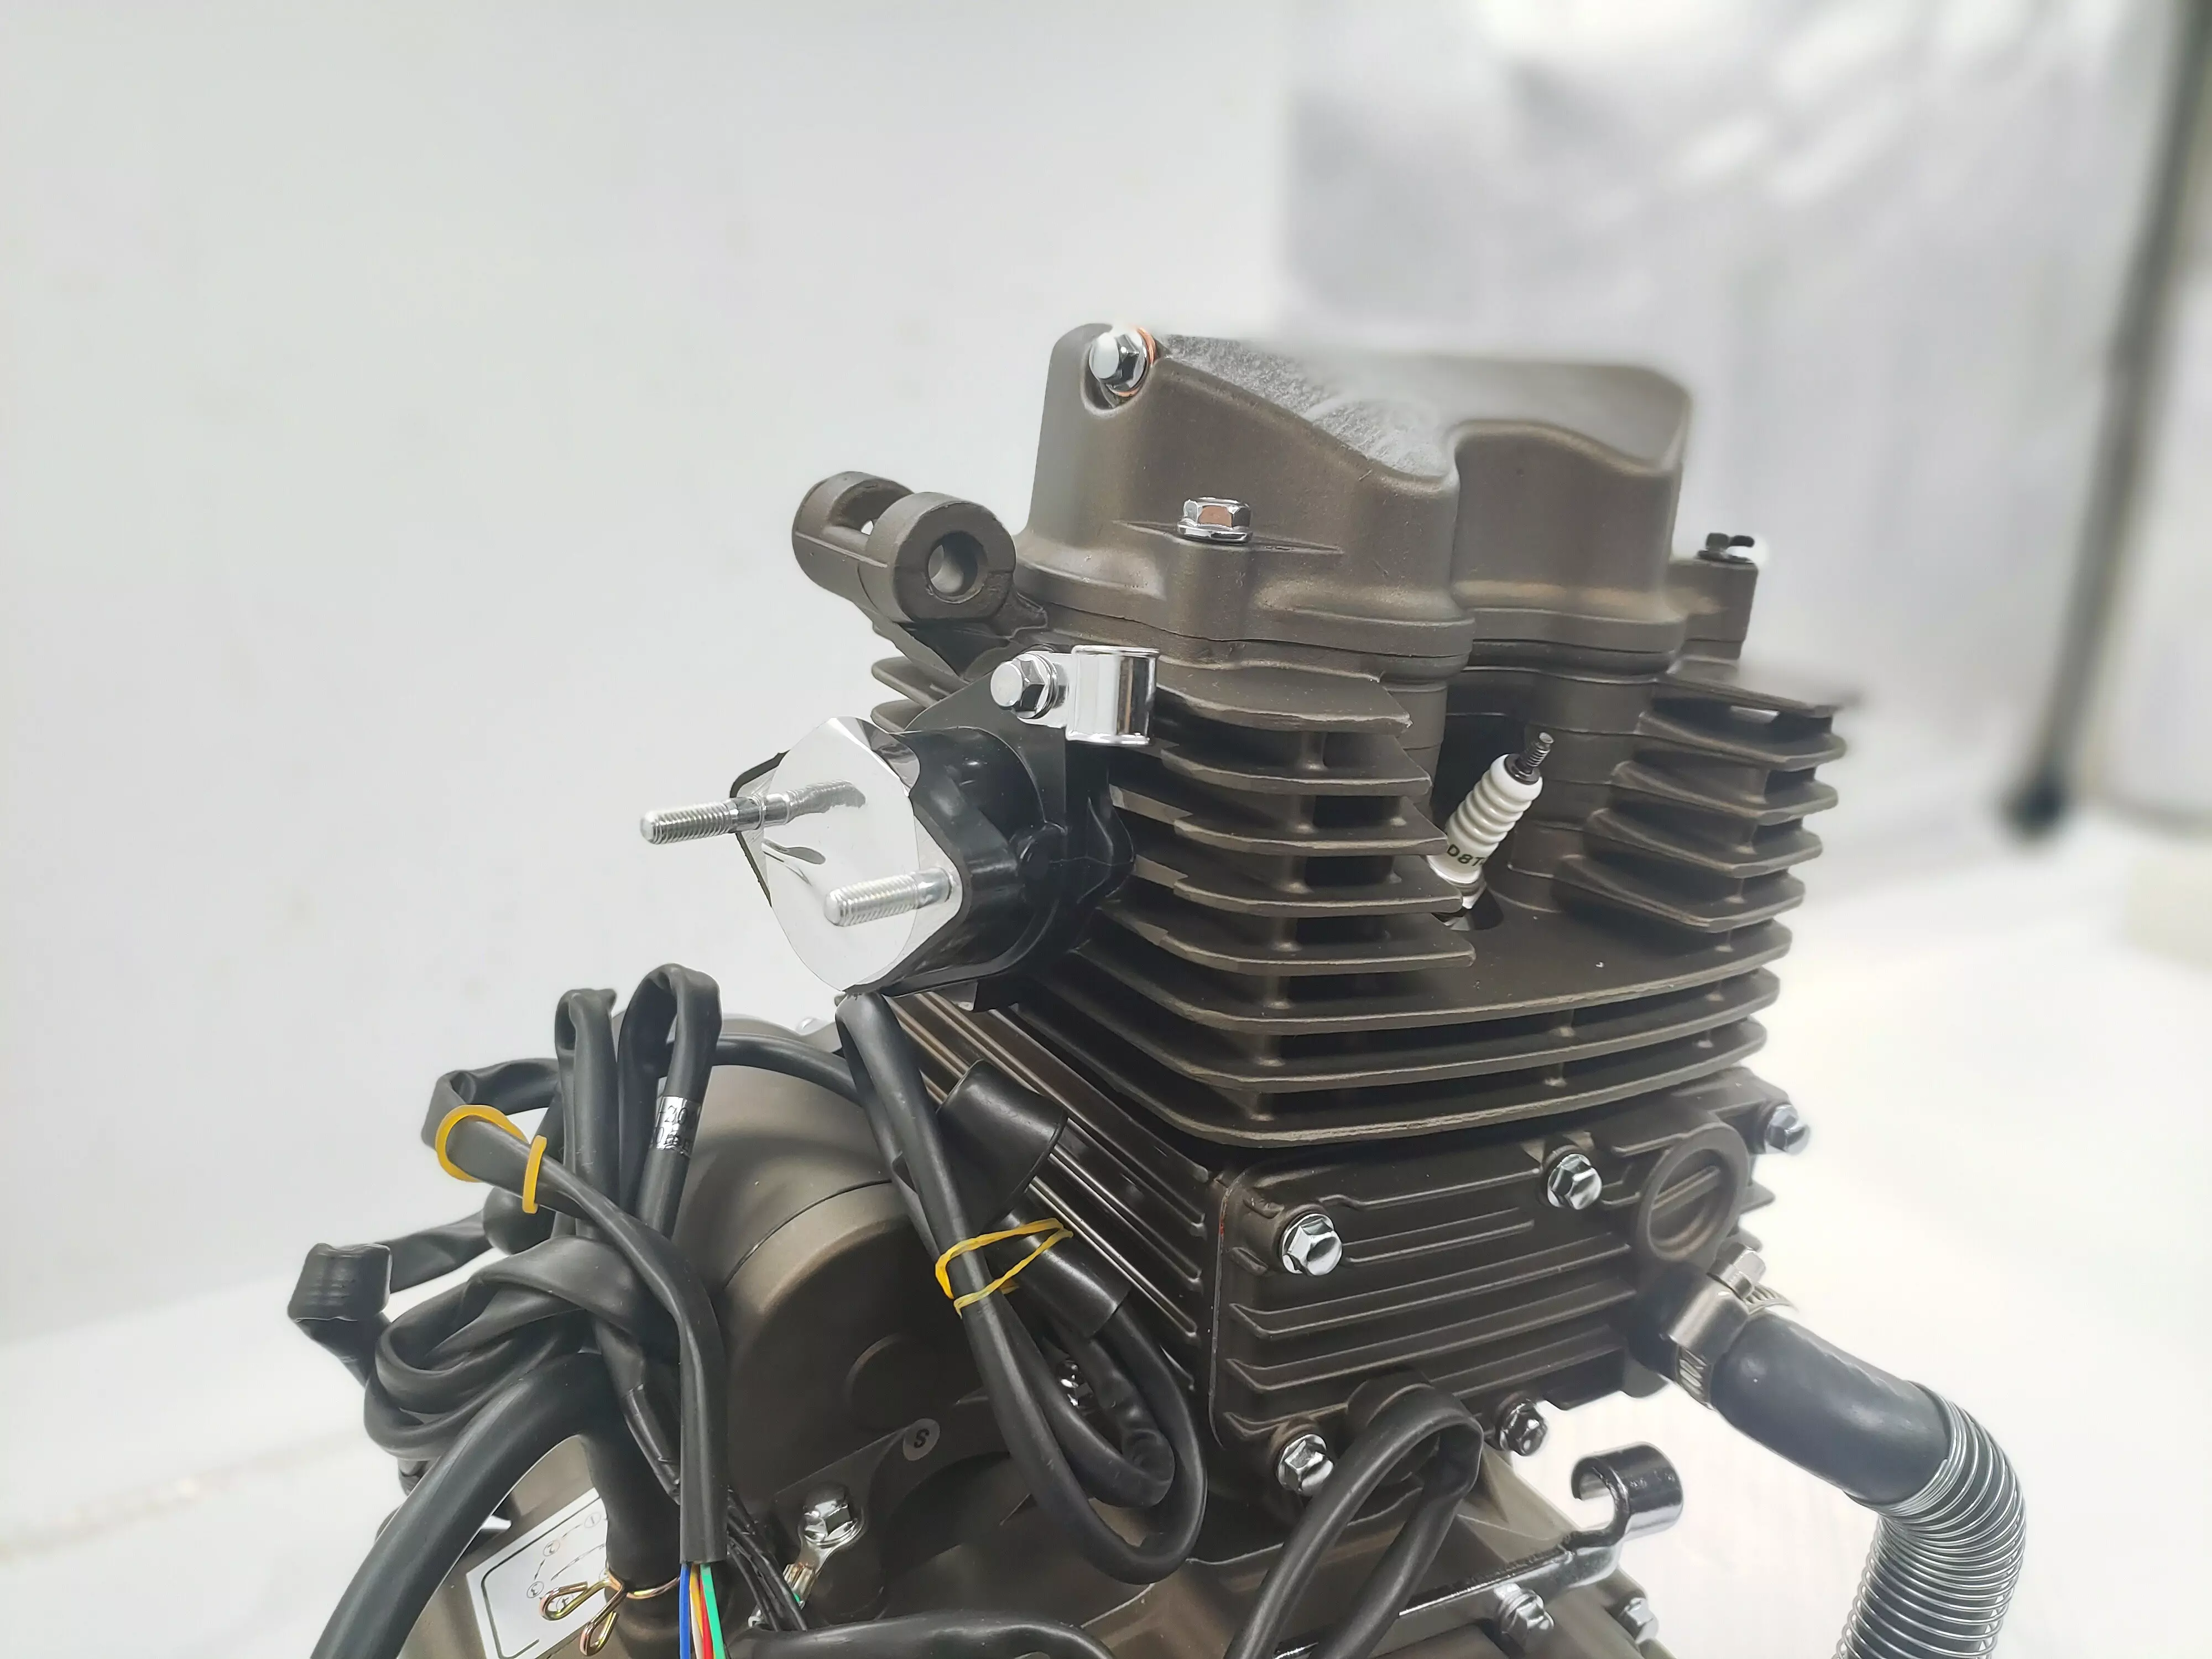 DAYANG LIFAN CG175cc Cool with the  pump Motorcycle Engine Assembly Single Cylinder Four Stroke Style China CCC Origin Type